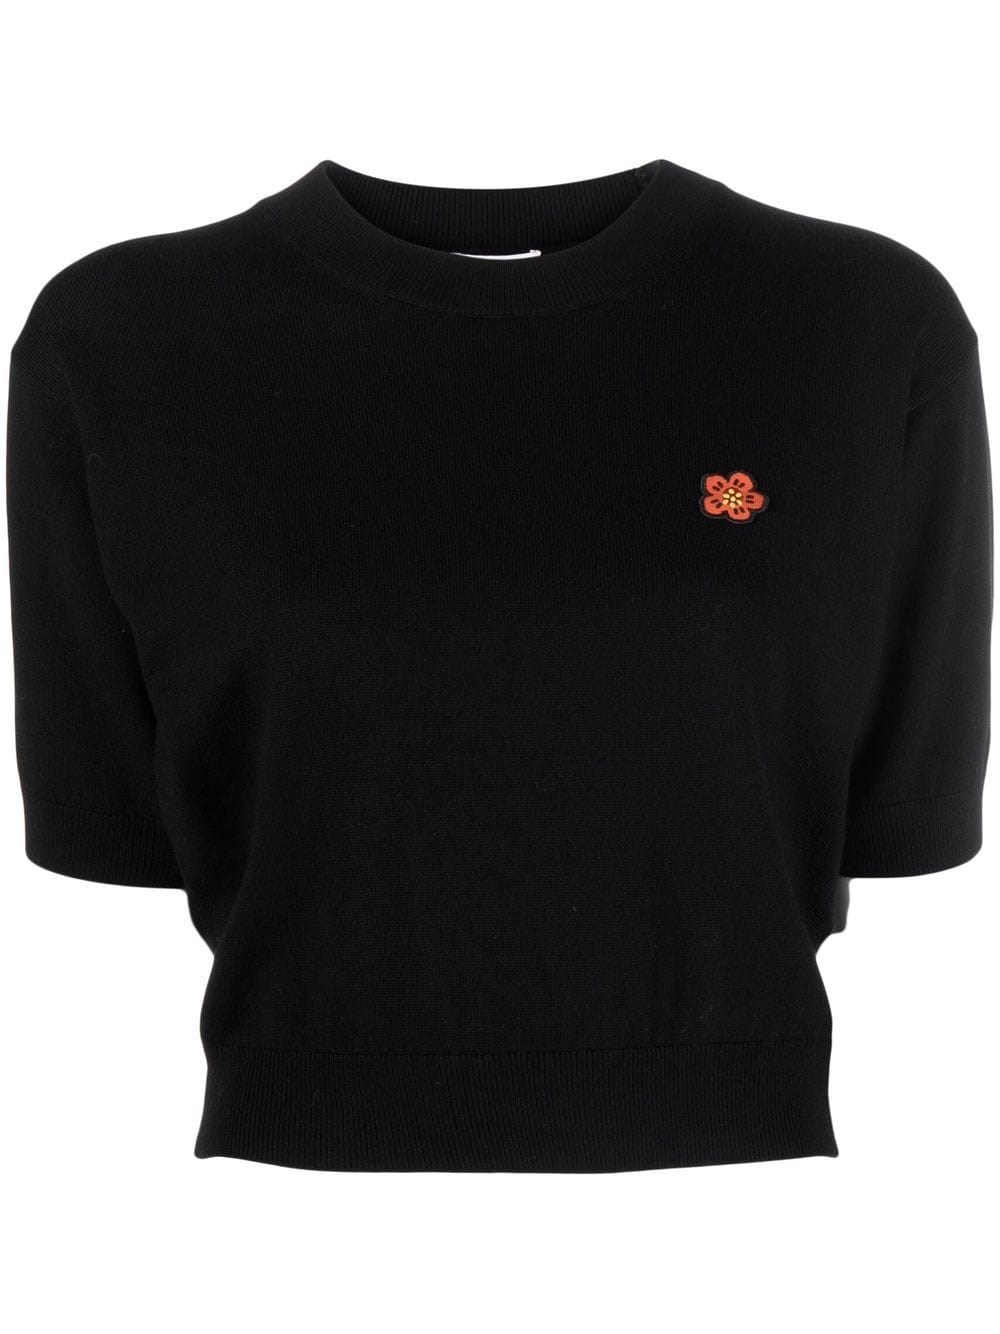 KENZO BLACK, WOOL, ROUND NECK AND SHORT SLEEVES.